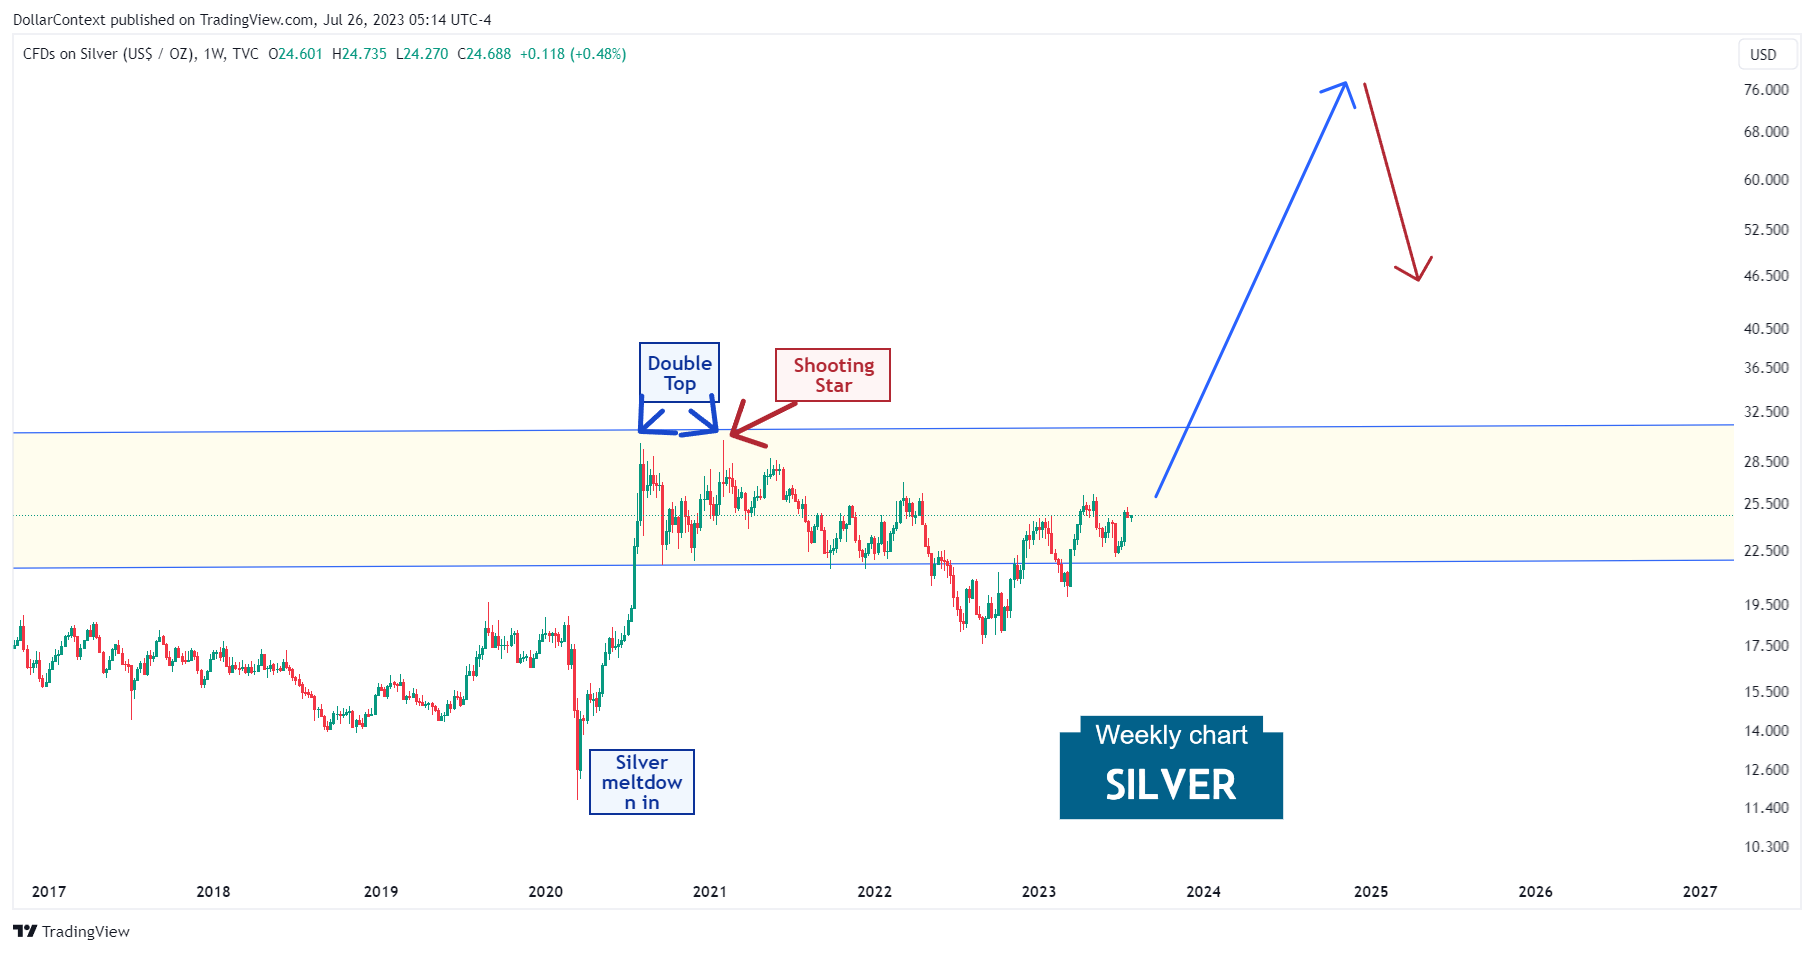 Outlook for Silver Prices